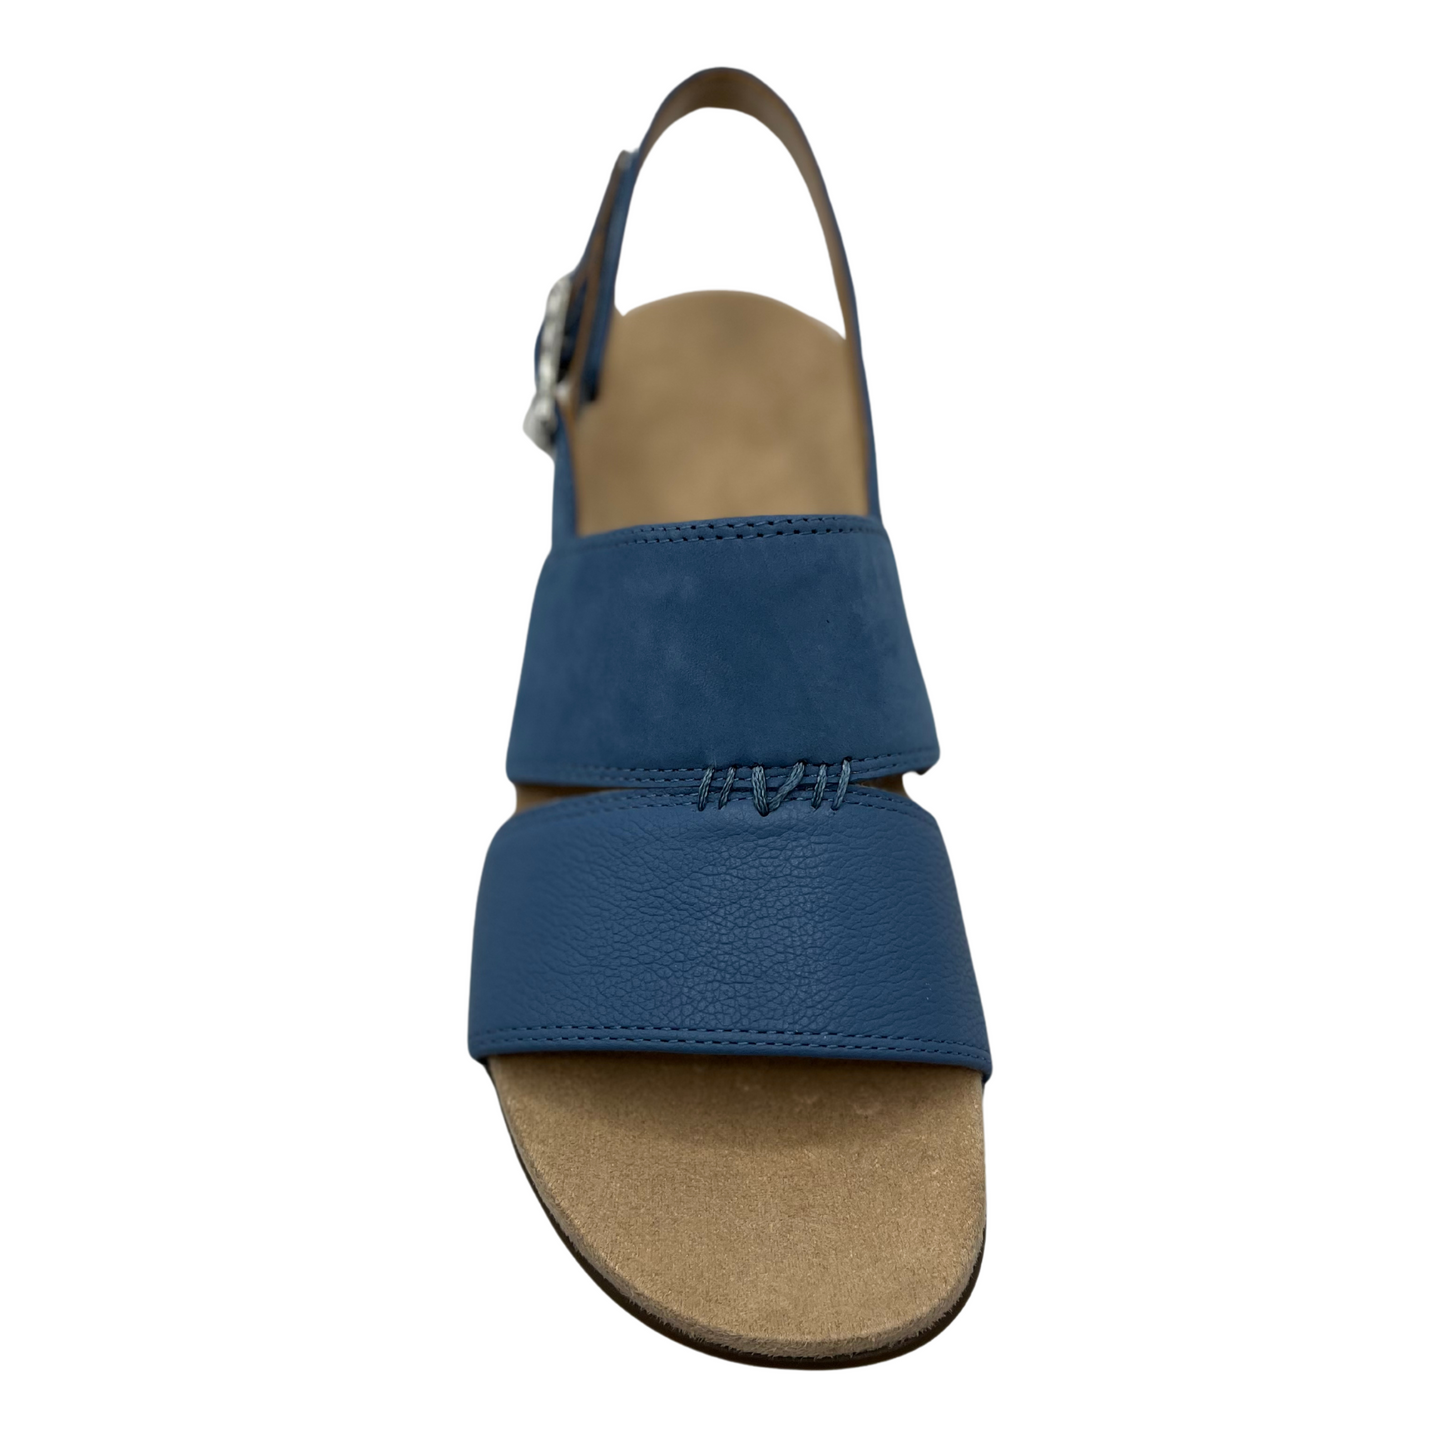 Top view of blue nubuck sandal with slingback strap and rounded toe